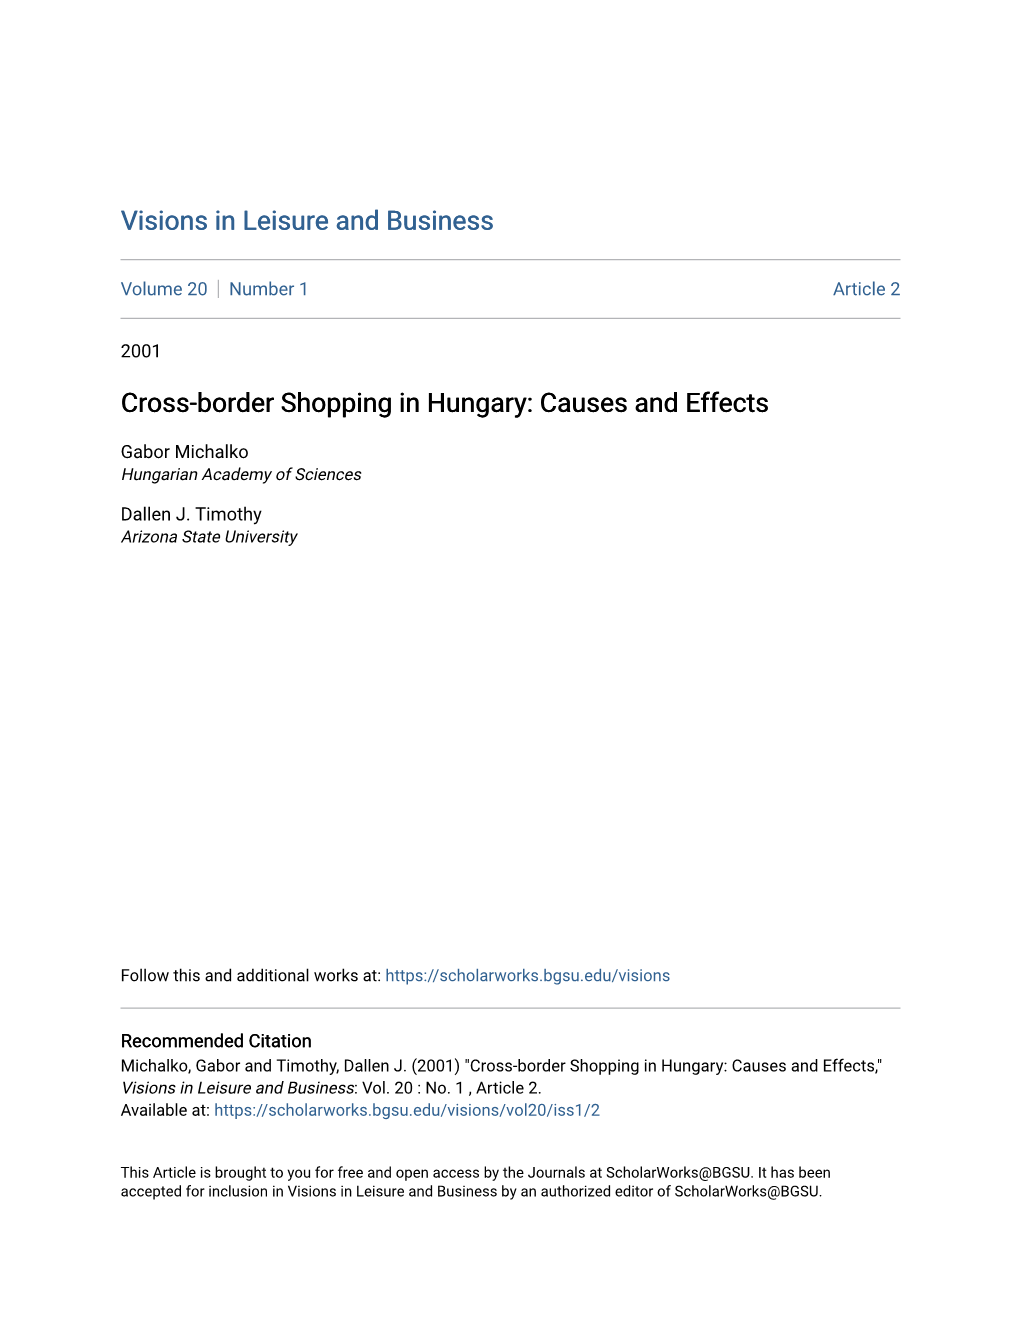 Cross-Border Shopping in Hungary: Causes and Effects